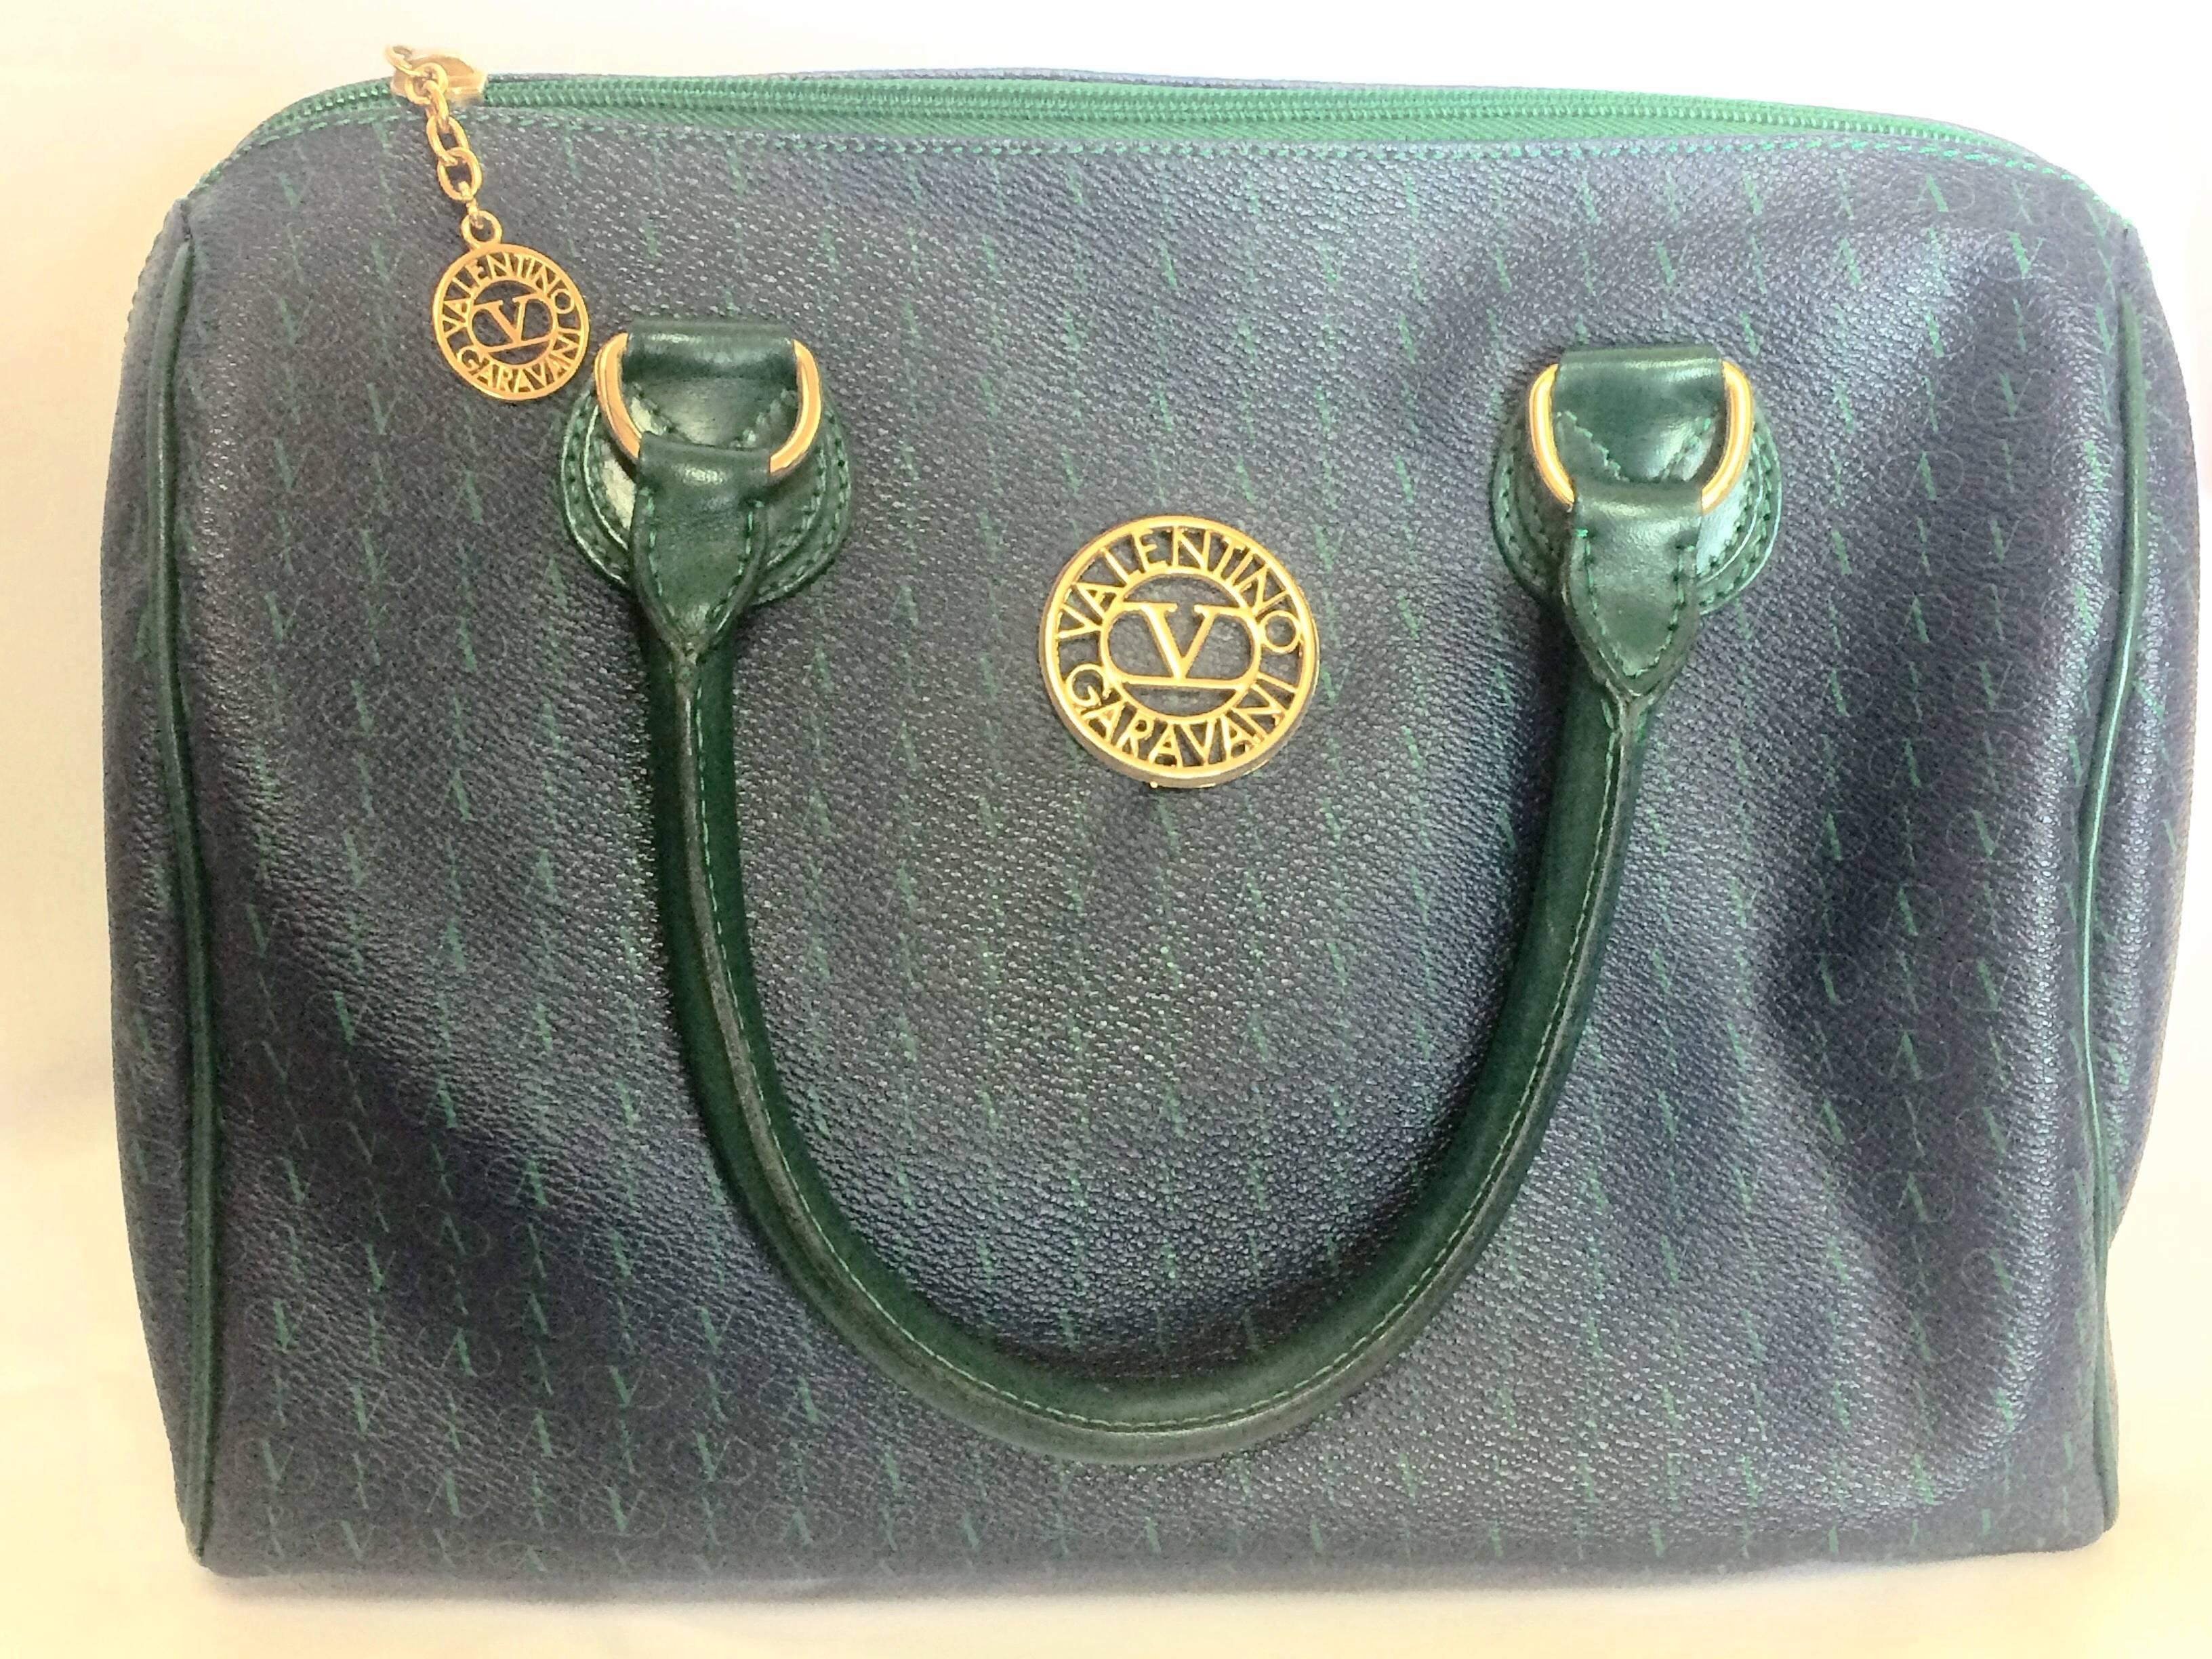 1990s. Vintage Valentino Garavani blue and green speedy bag style handbag with golden logo cutout motifs. Valentino purse for daily use.

This is the vintage Valentino Garavani blue and green handbag purse approx early 90's.
Classic Speedy bag style